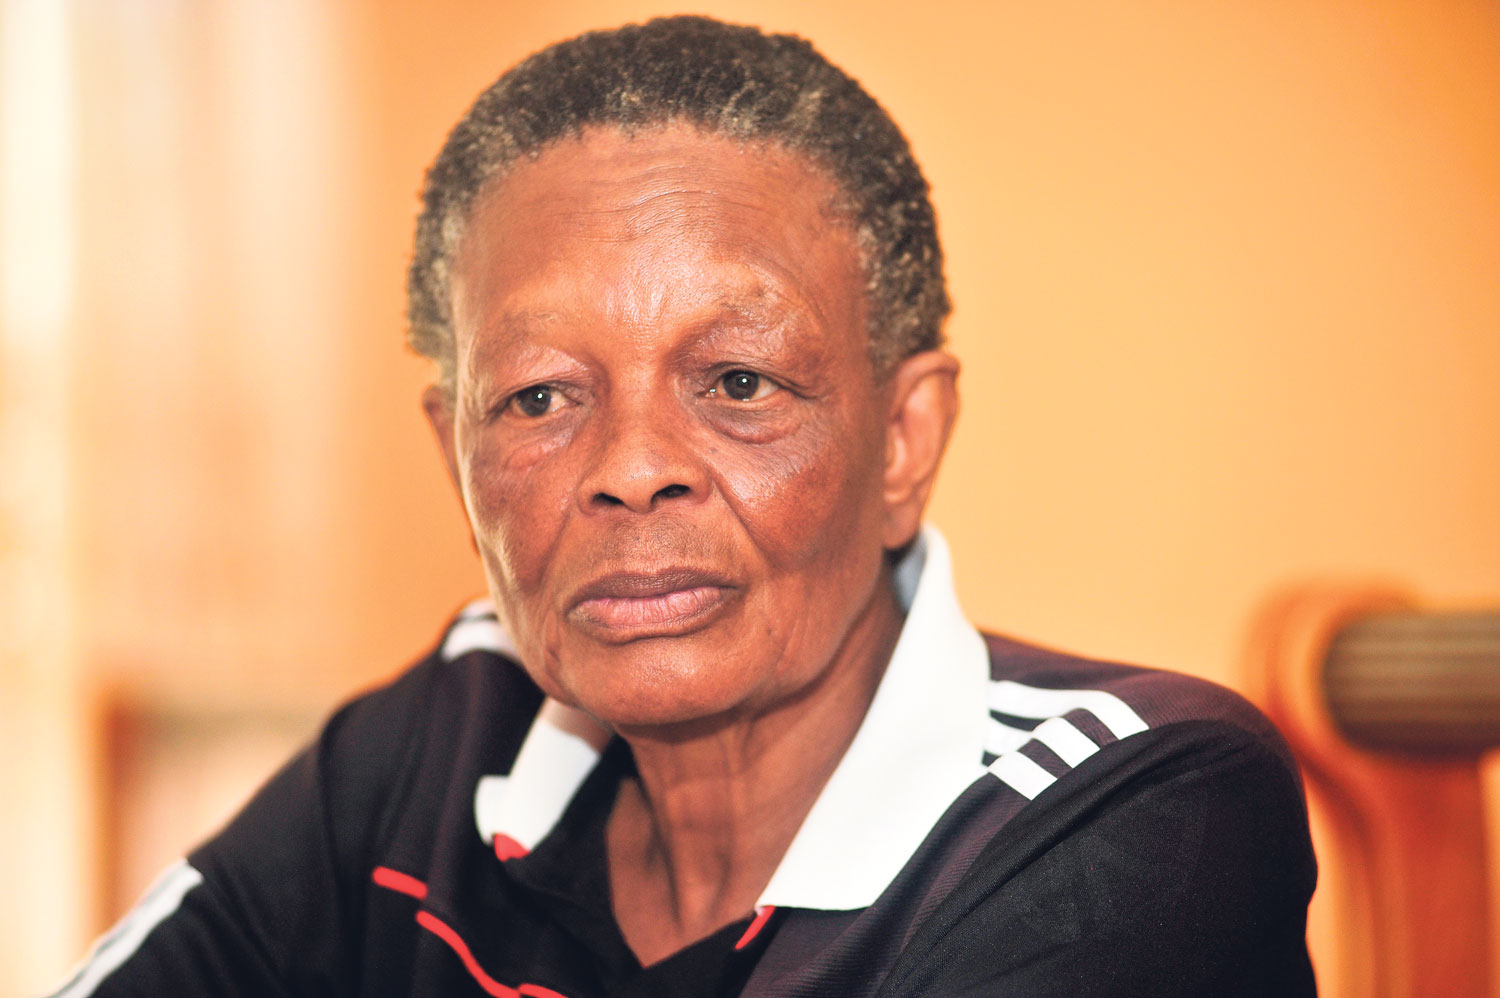 Midvaal resident, Thabi Lydia Mahakoe speaks to The Citizen at her home in Johannesburg, 29 April 2016, about her relationship with Nelson Mandela. Picture: Nigel Sibanda